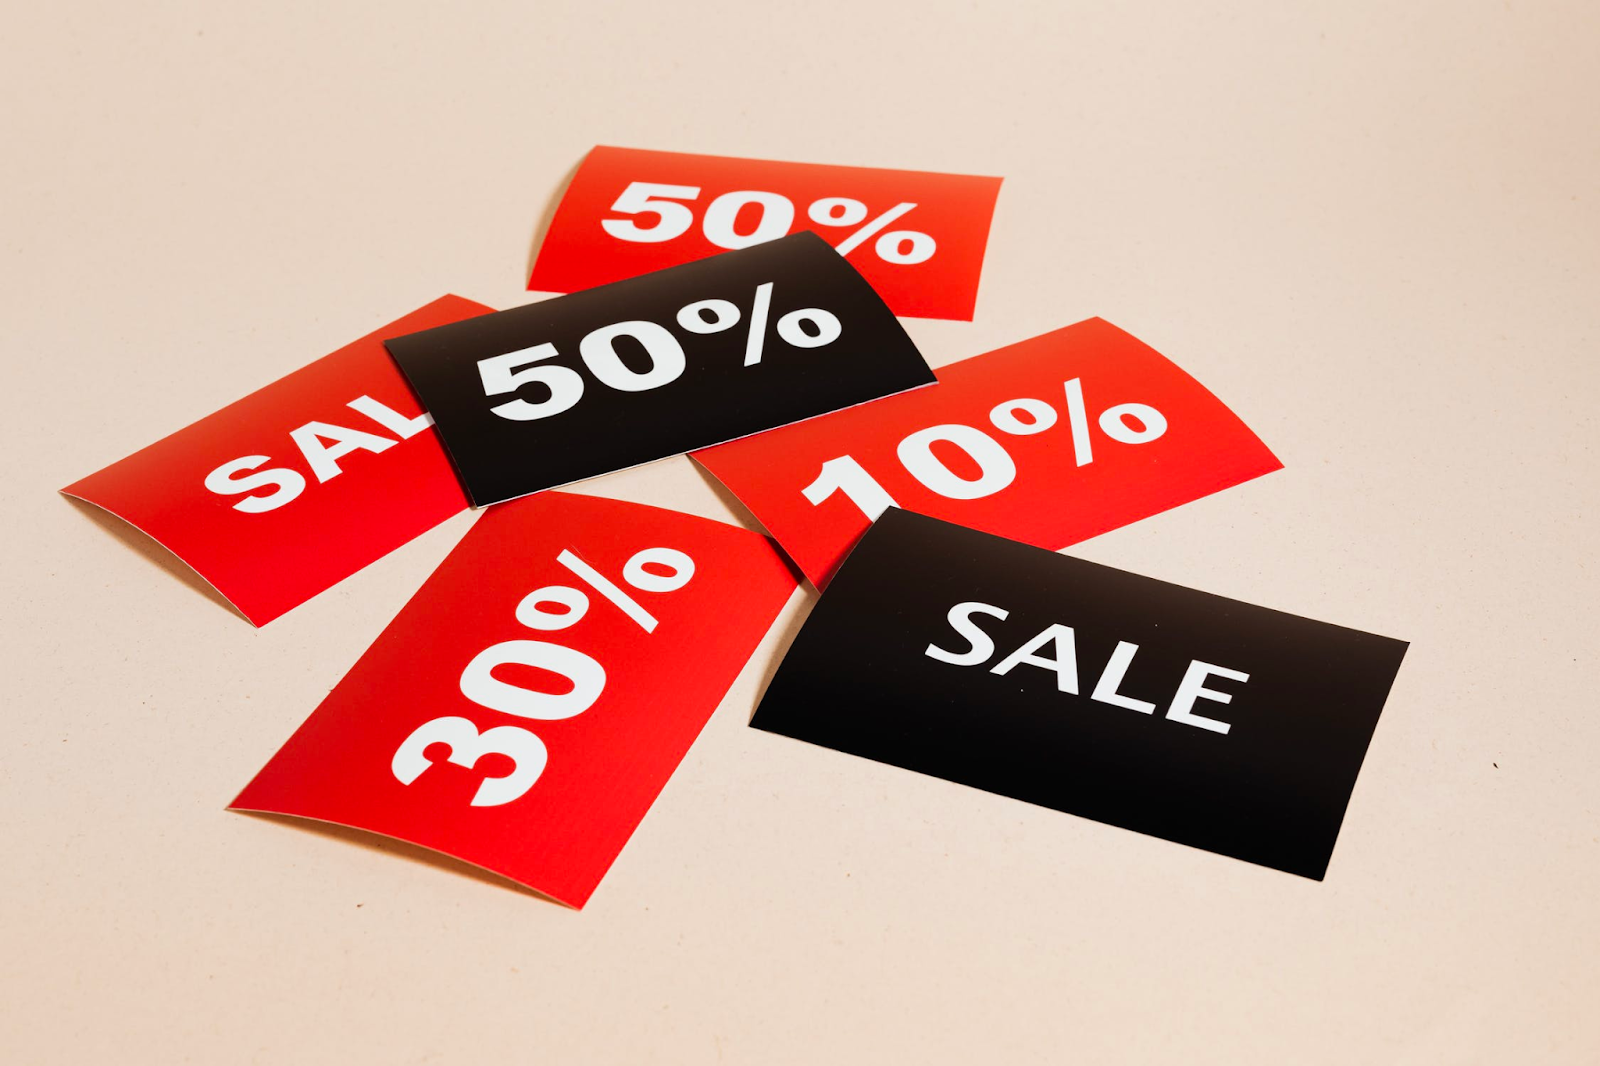 Flash sales and promotion ideas.